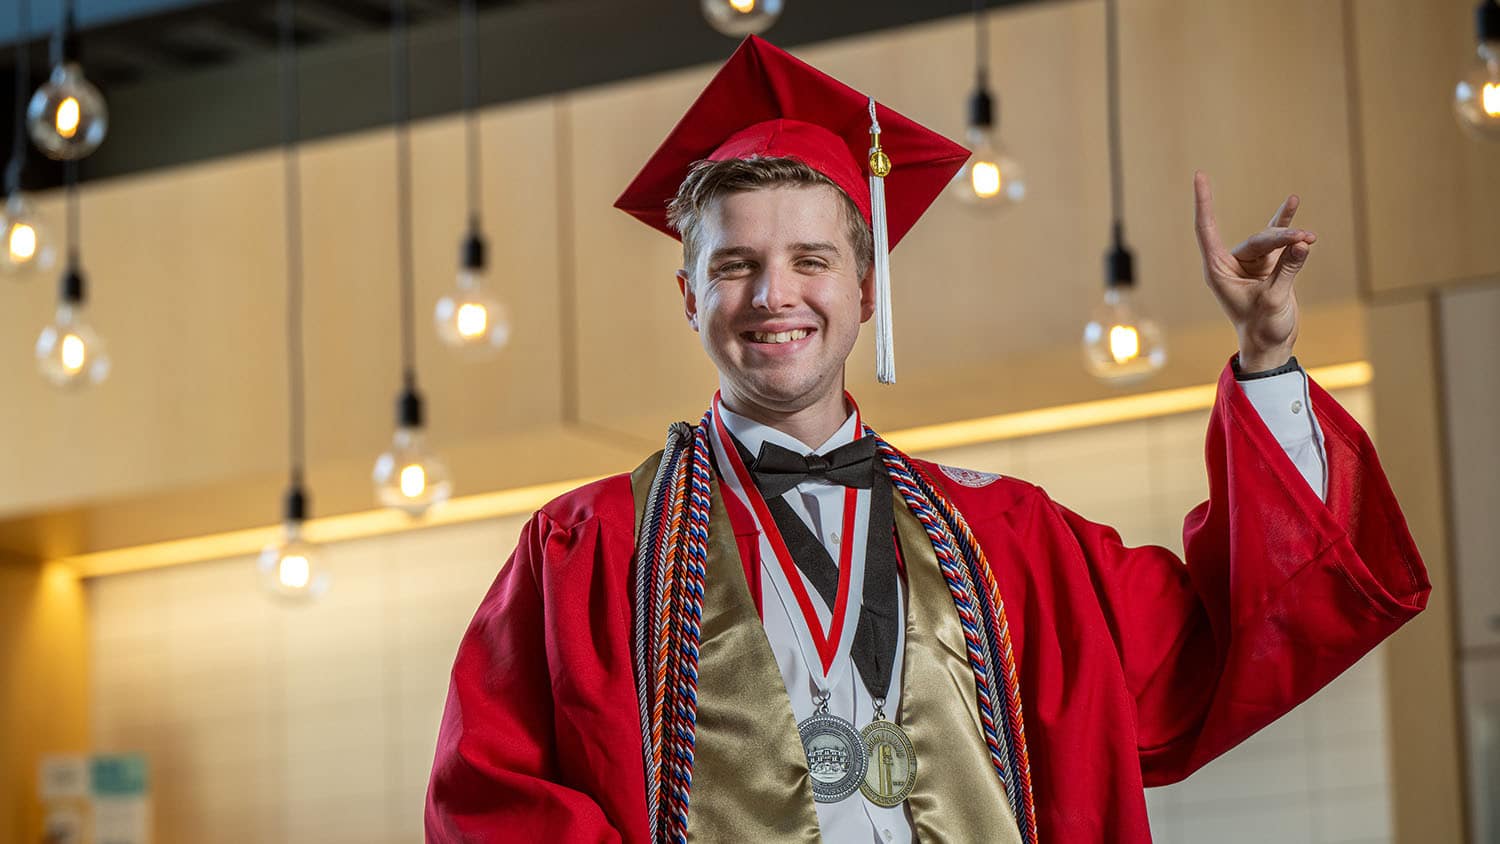 Shaun Deardorff, a College of Engineering student graduating this spring, stands in his red cap and gown.